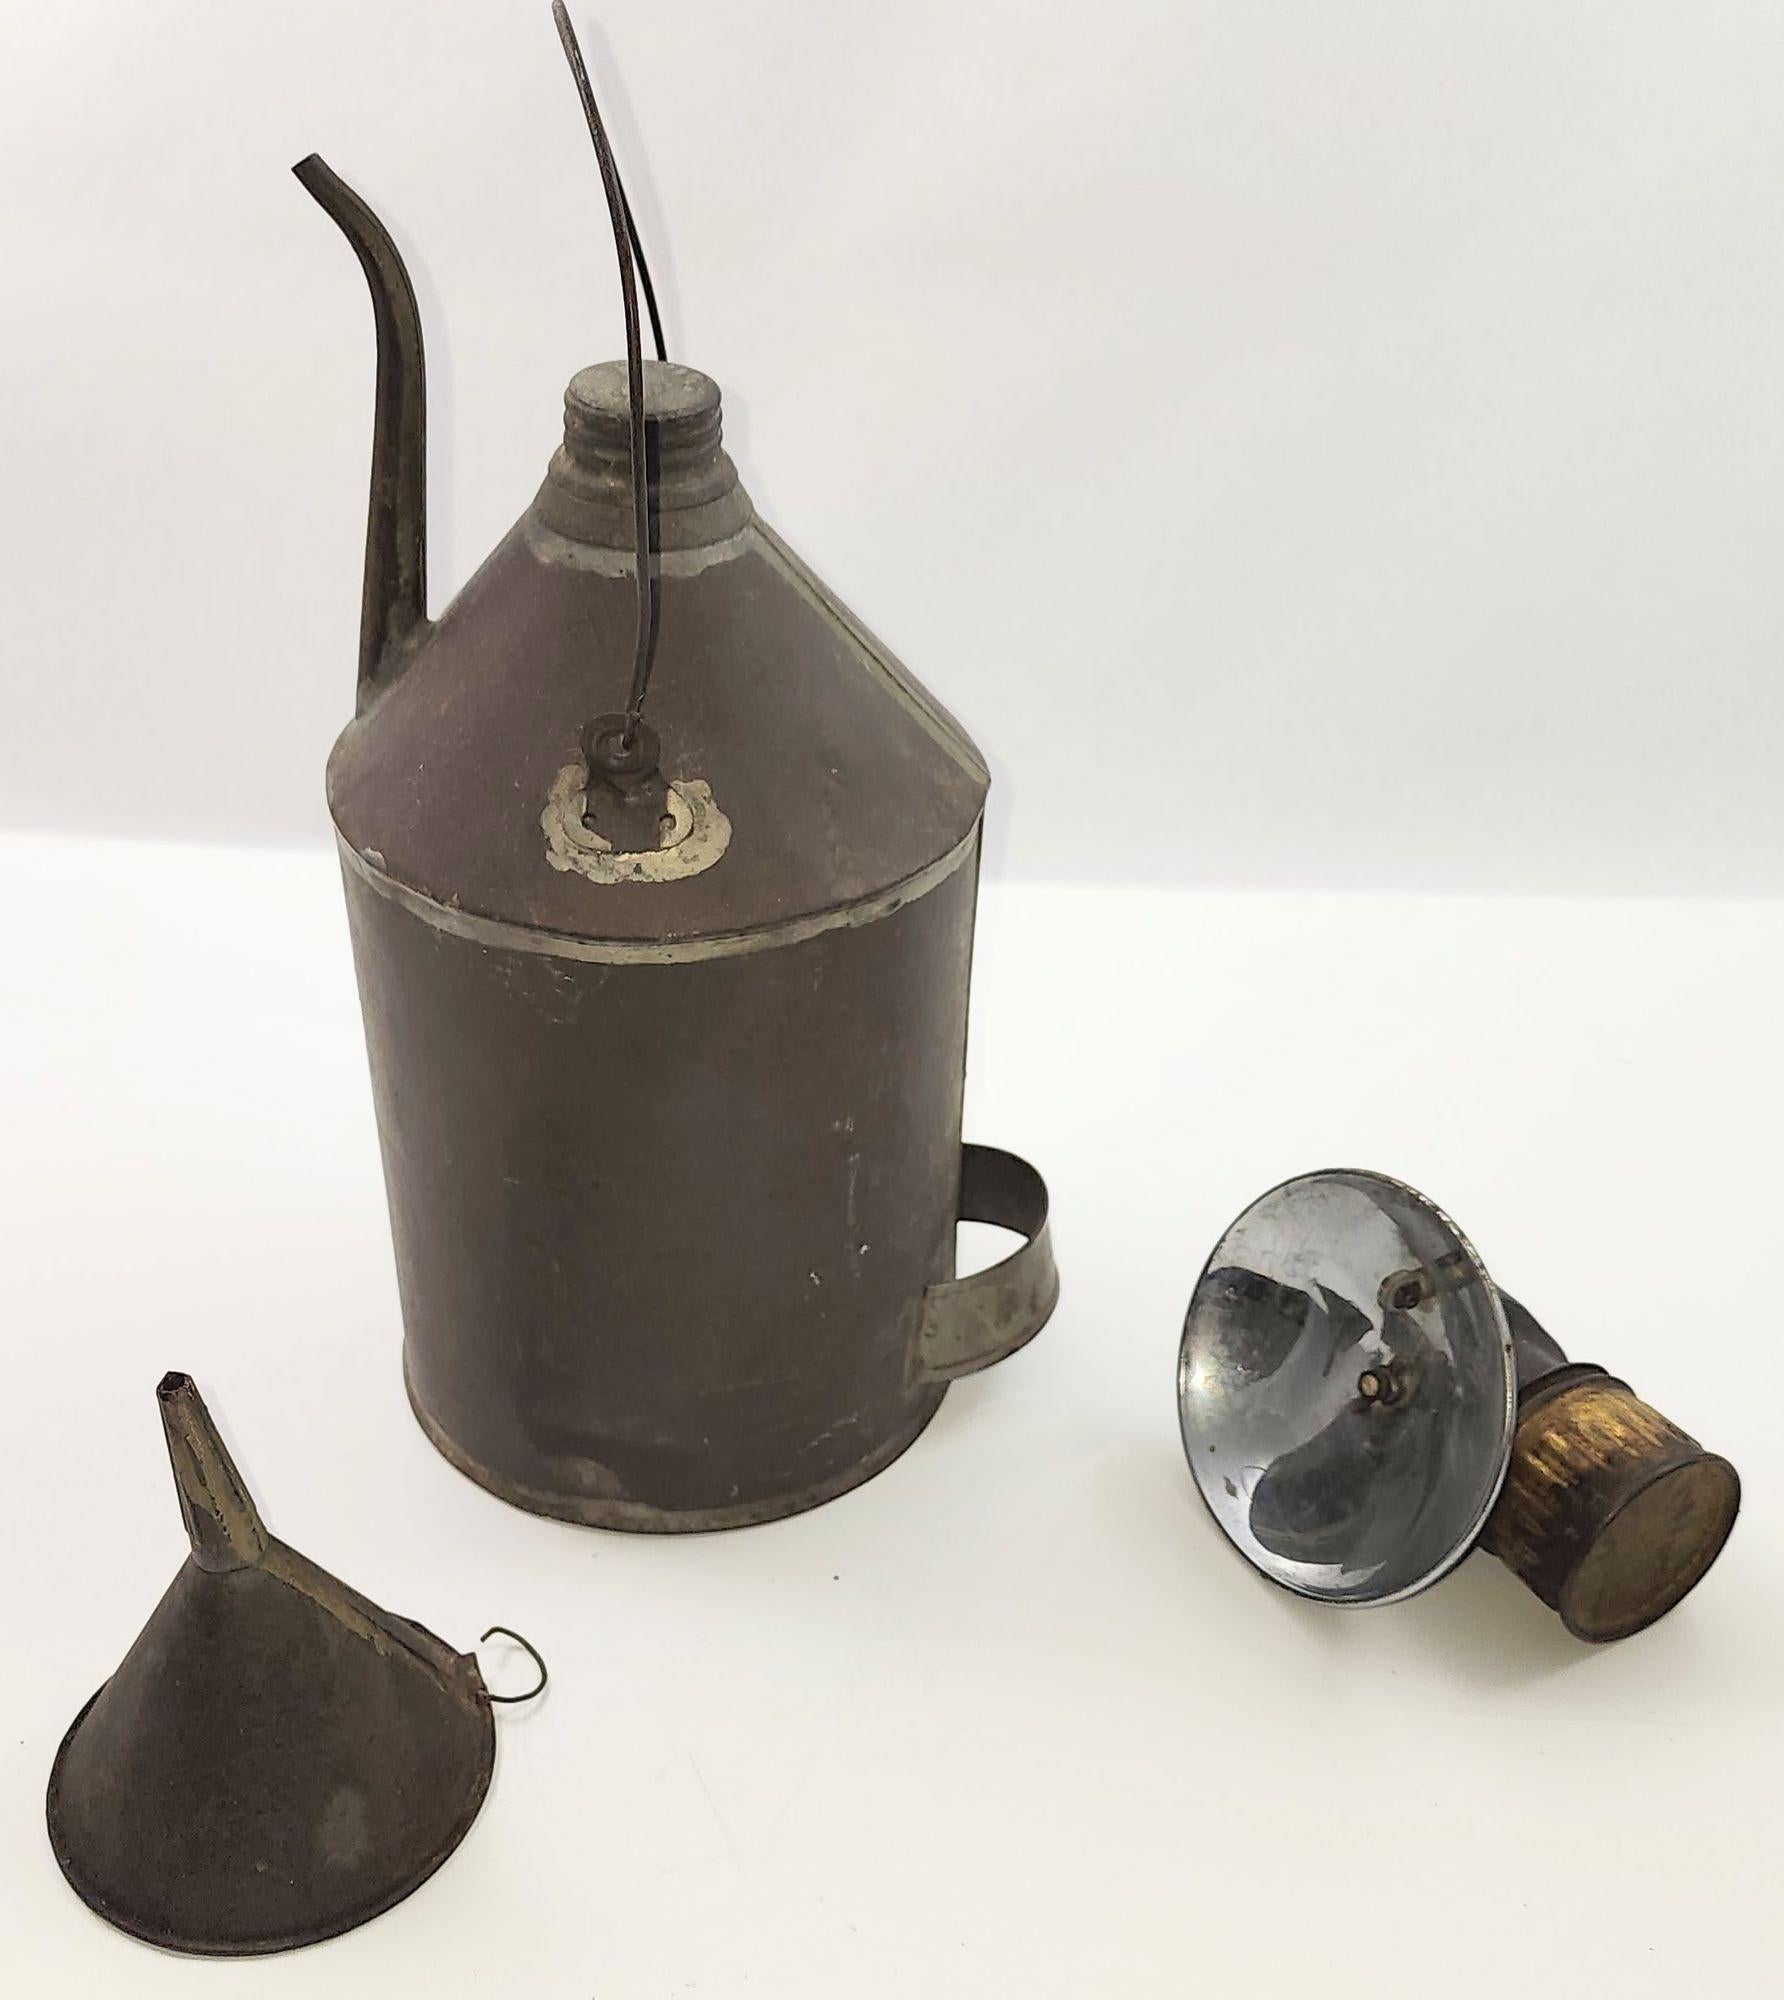 Antique collectible circa 1900s Justrite Carbide Coal Miners Lamp, designed to be worn on a helmet, with a Coal Oil Can and a Tin Funnel. Hand Crafted by the renowned Justrite Manufacturing Company, these lamps are crafted from durable brass,